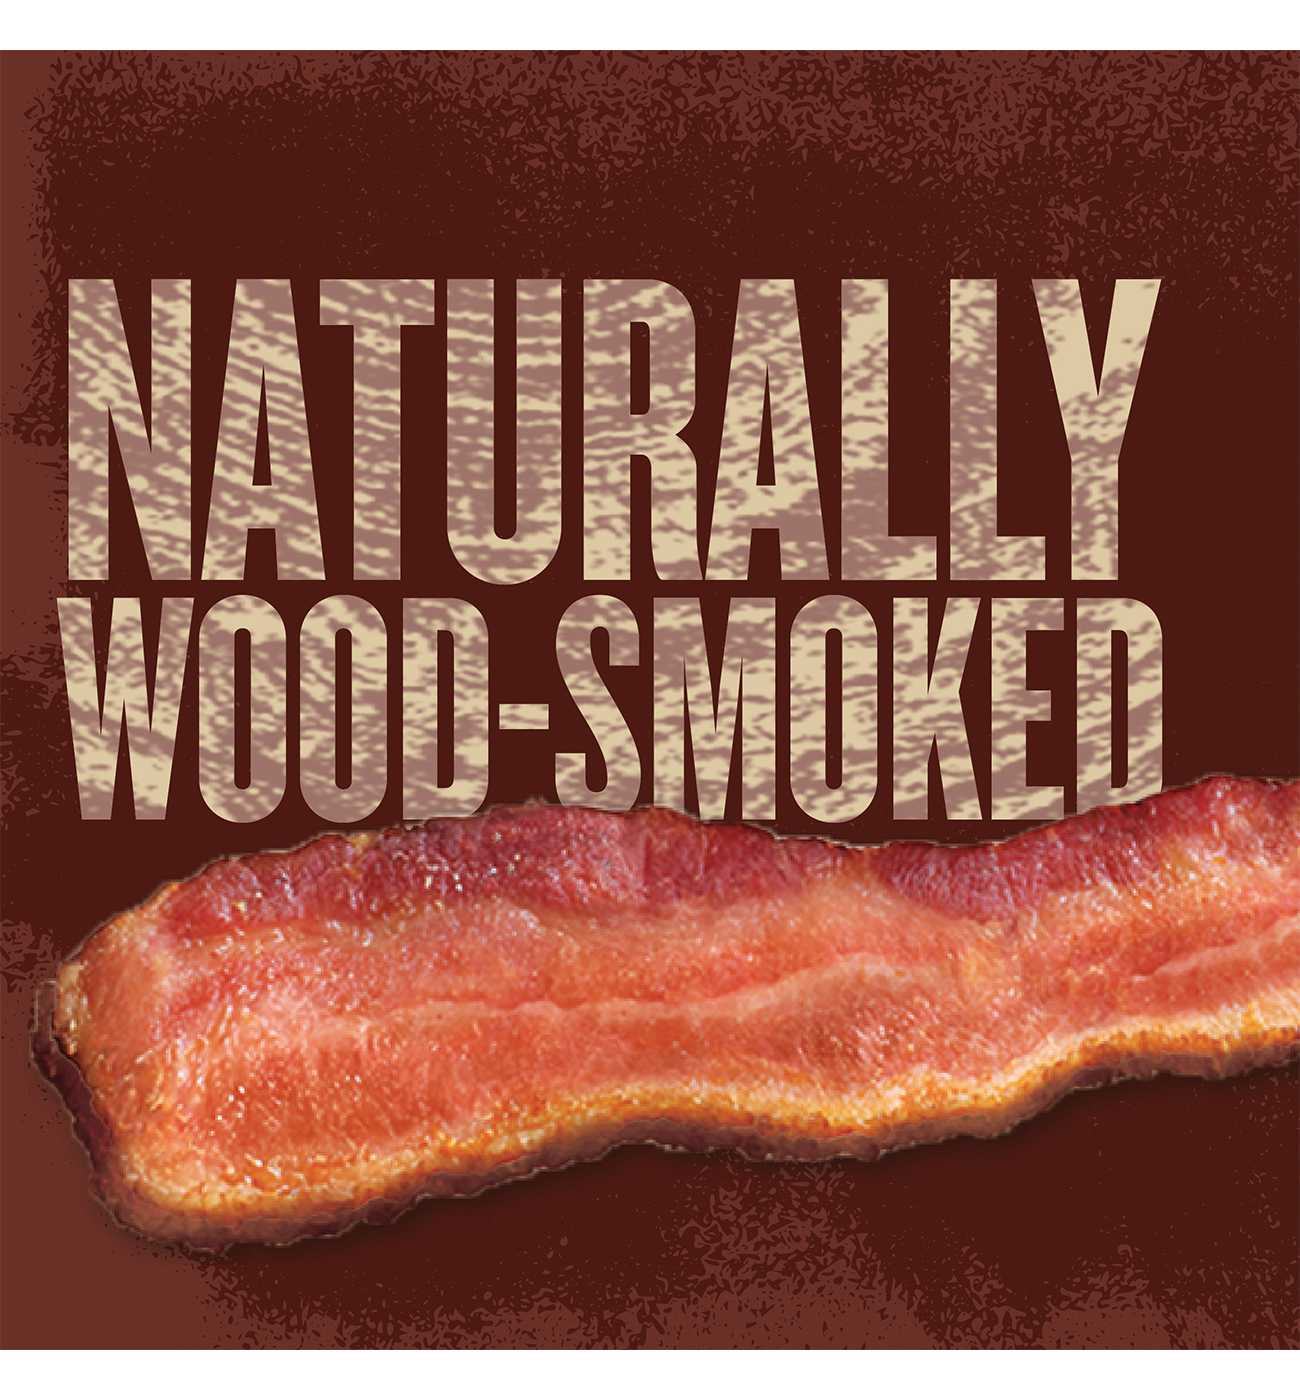 Wright Brand Hickory Smoked Thick Cut Bacon; image 5 of 6